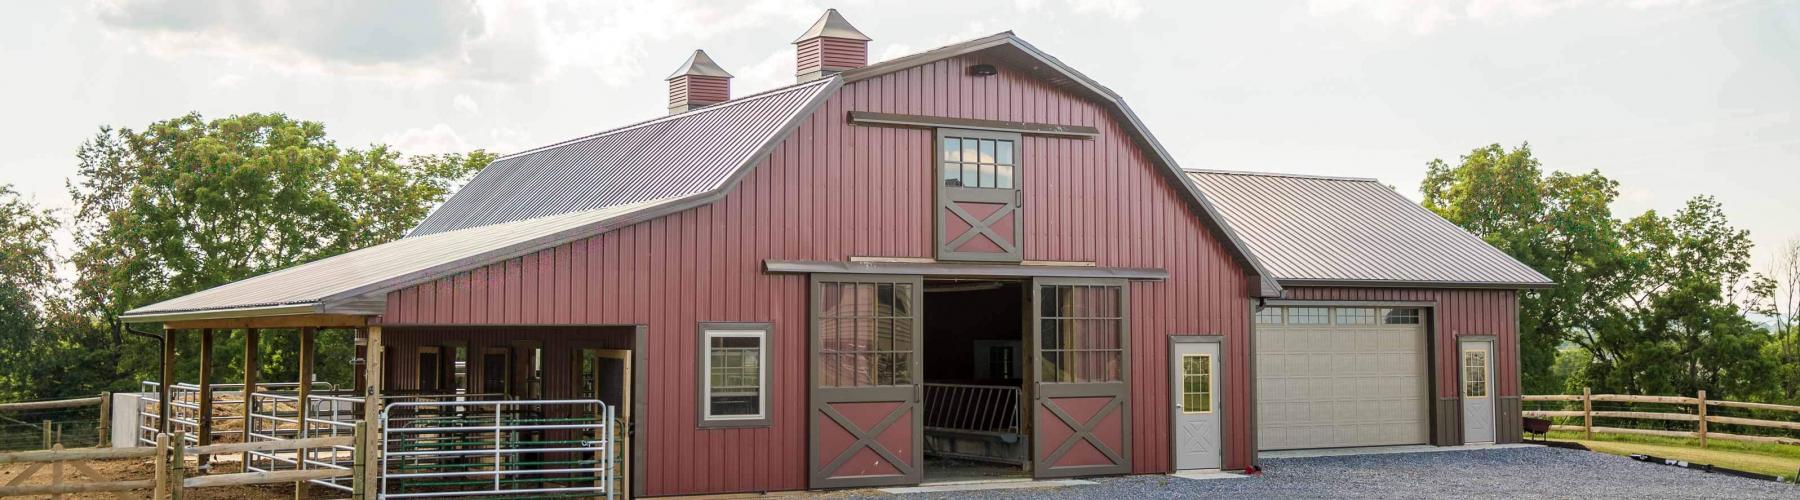 This barn / garage combination was built by Stable Hollow Construction